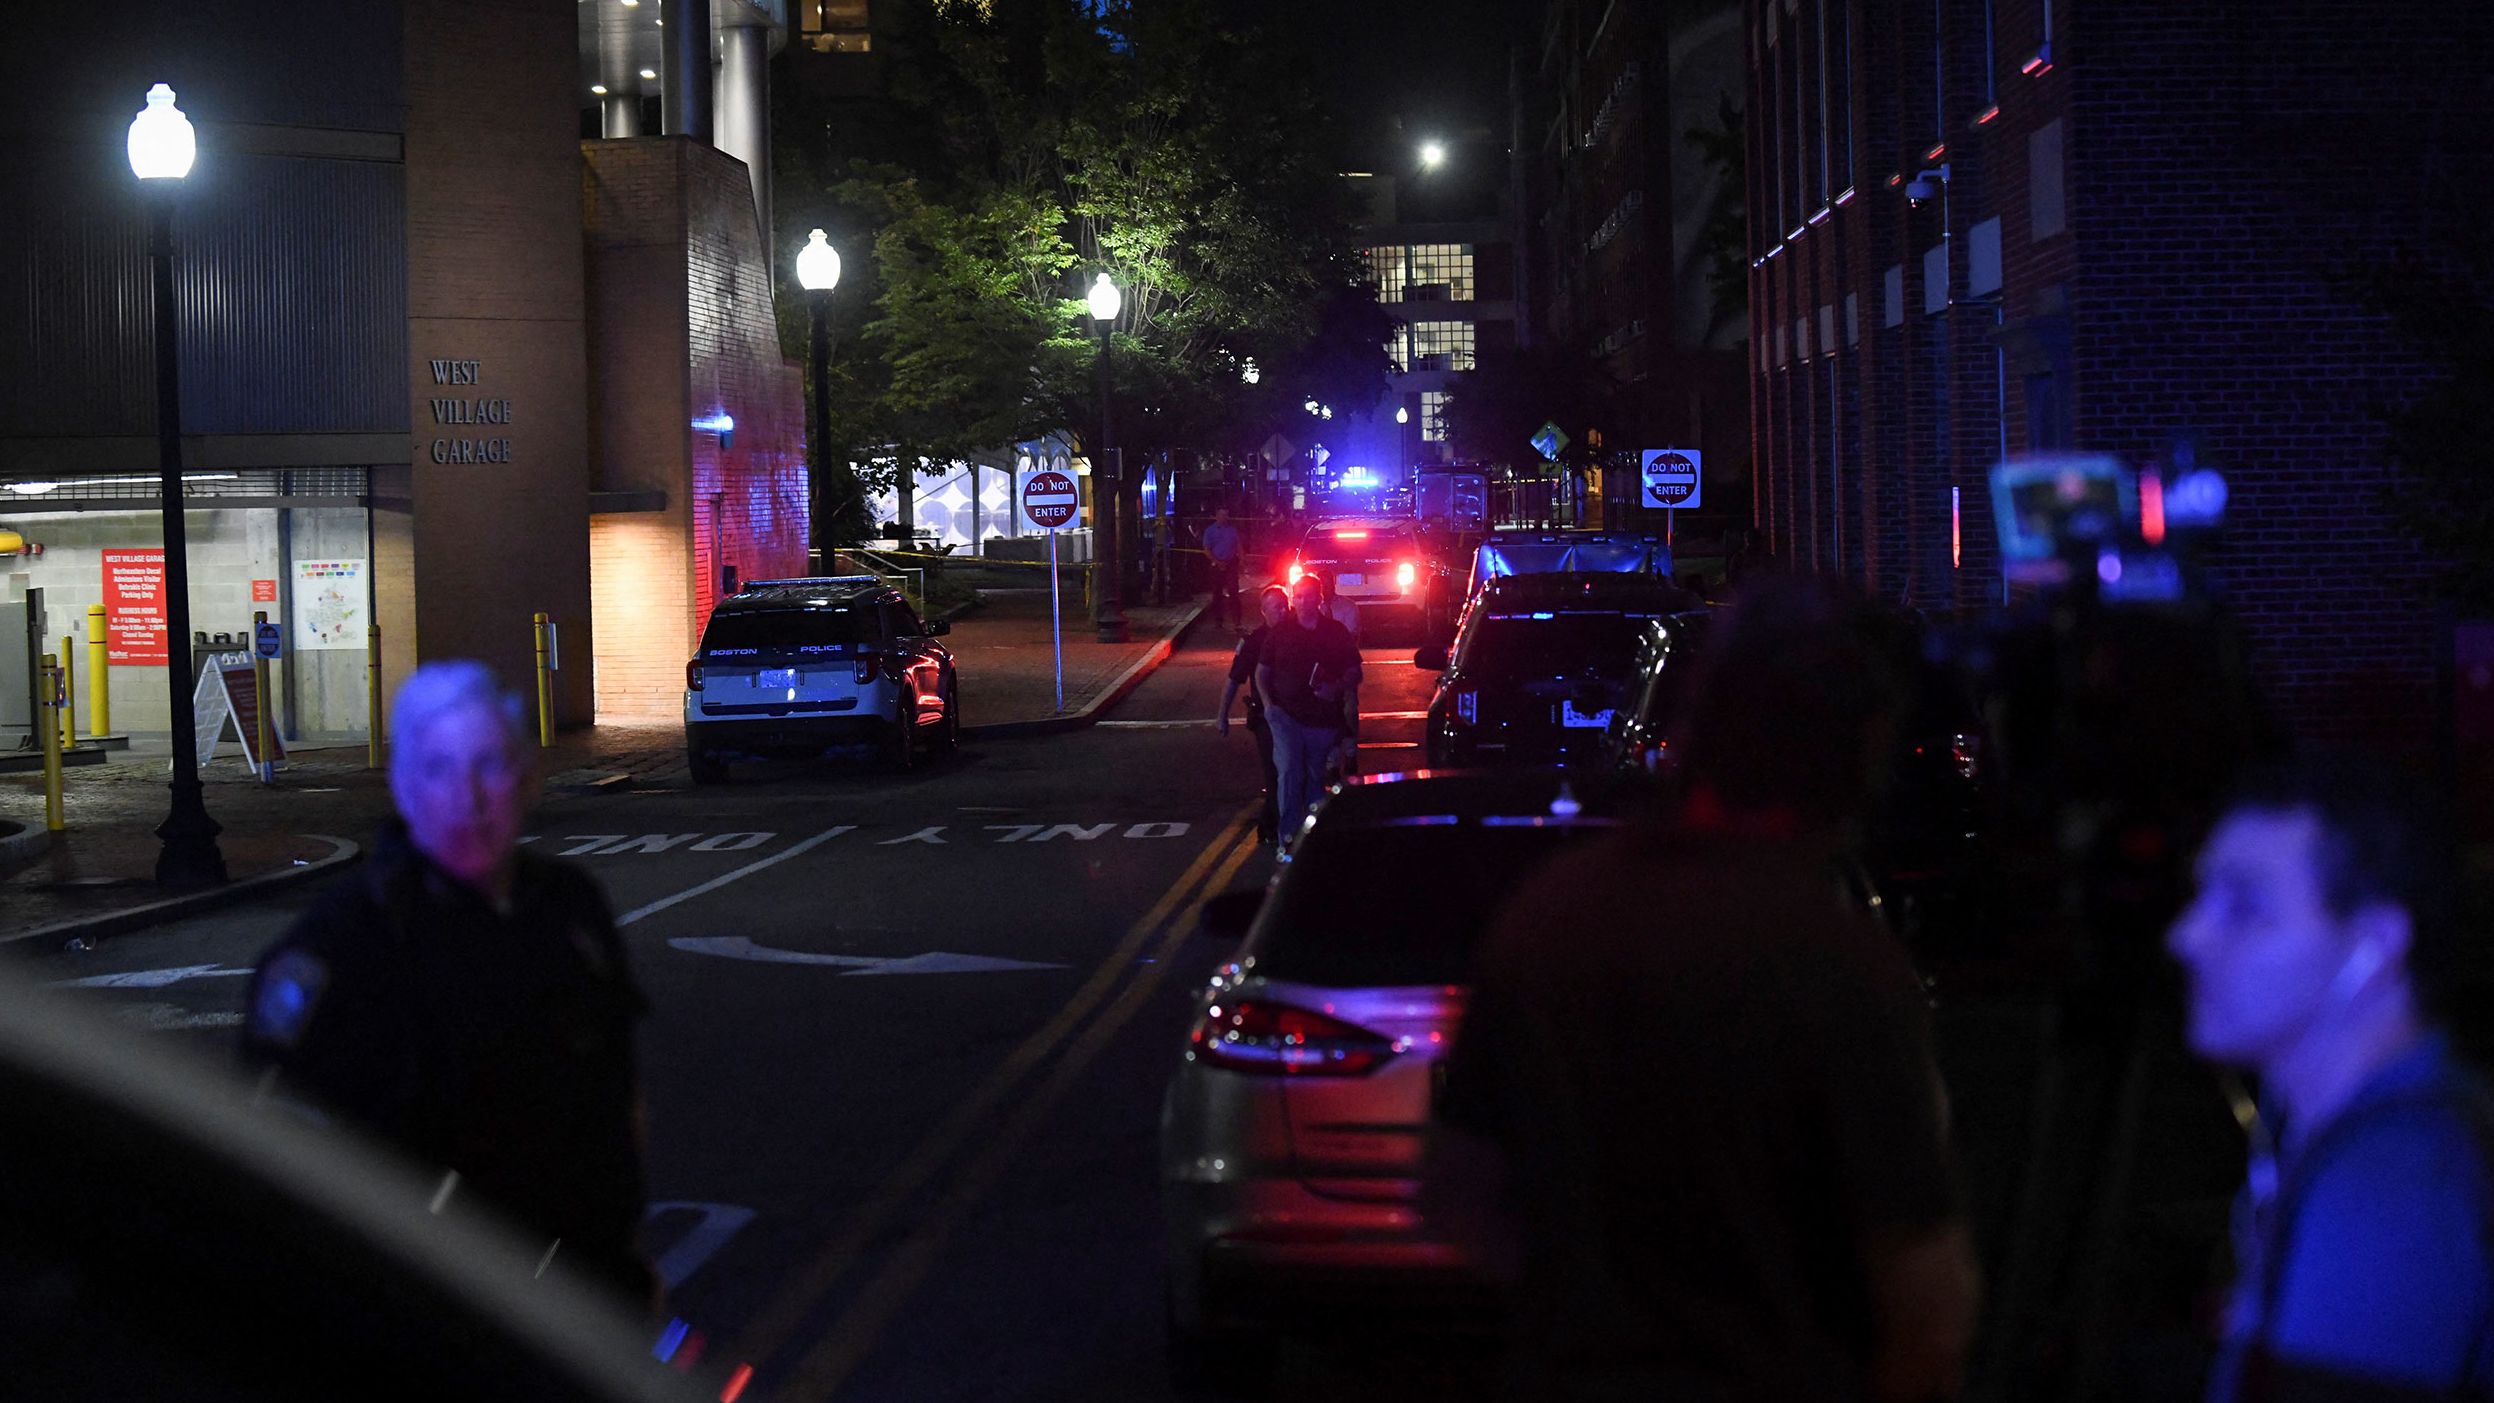 Boston Police Department's Bomb Squad, Boston Emergency Management Services and other law enforcement agencies responded to a reported package explosion on September 13.